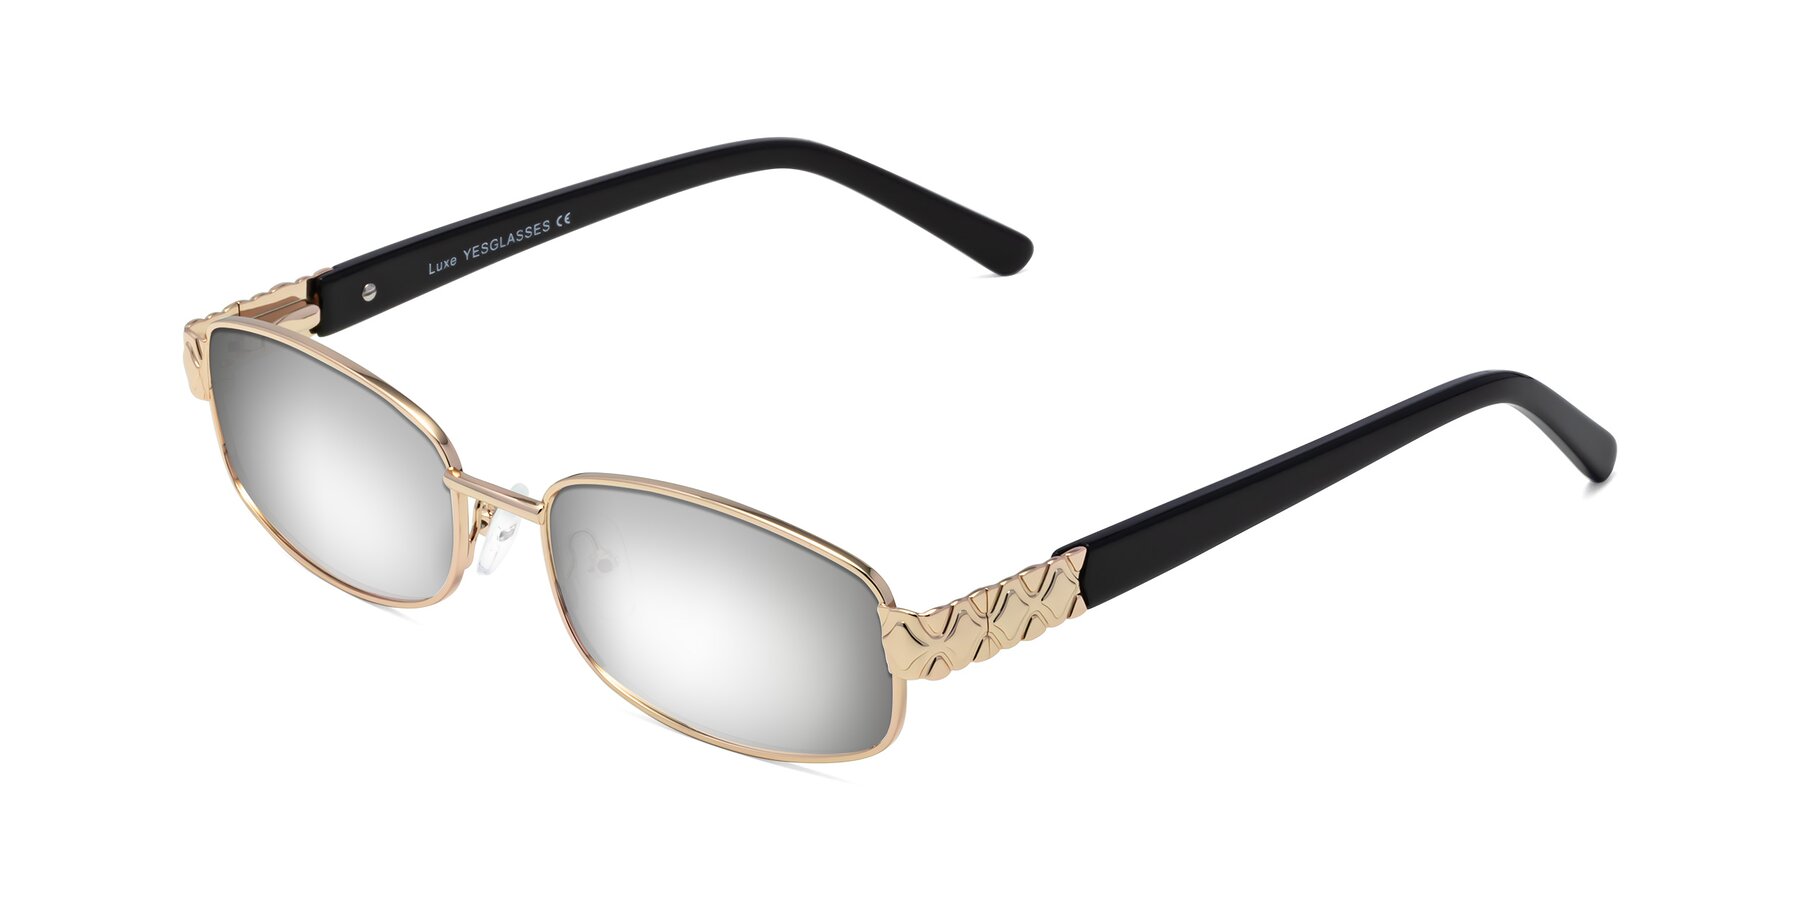 Angle of Luxe in Rose Gold with Silver Mirrored Lenses